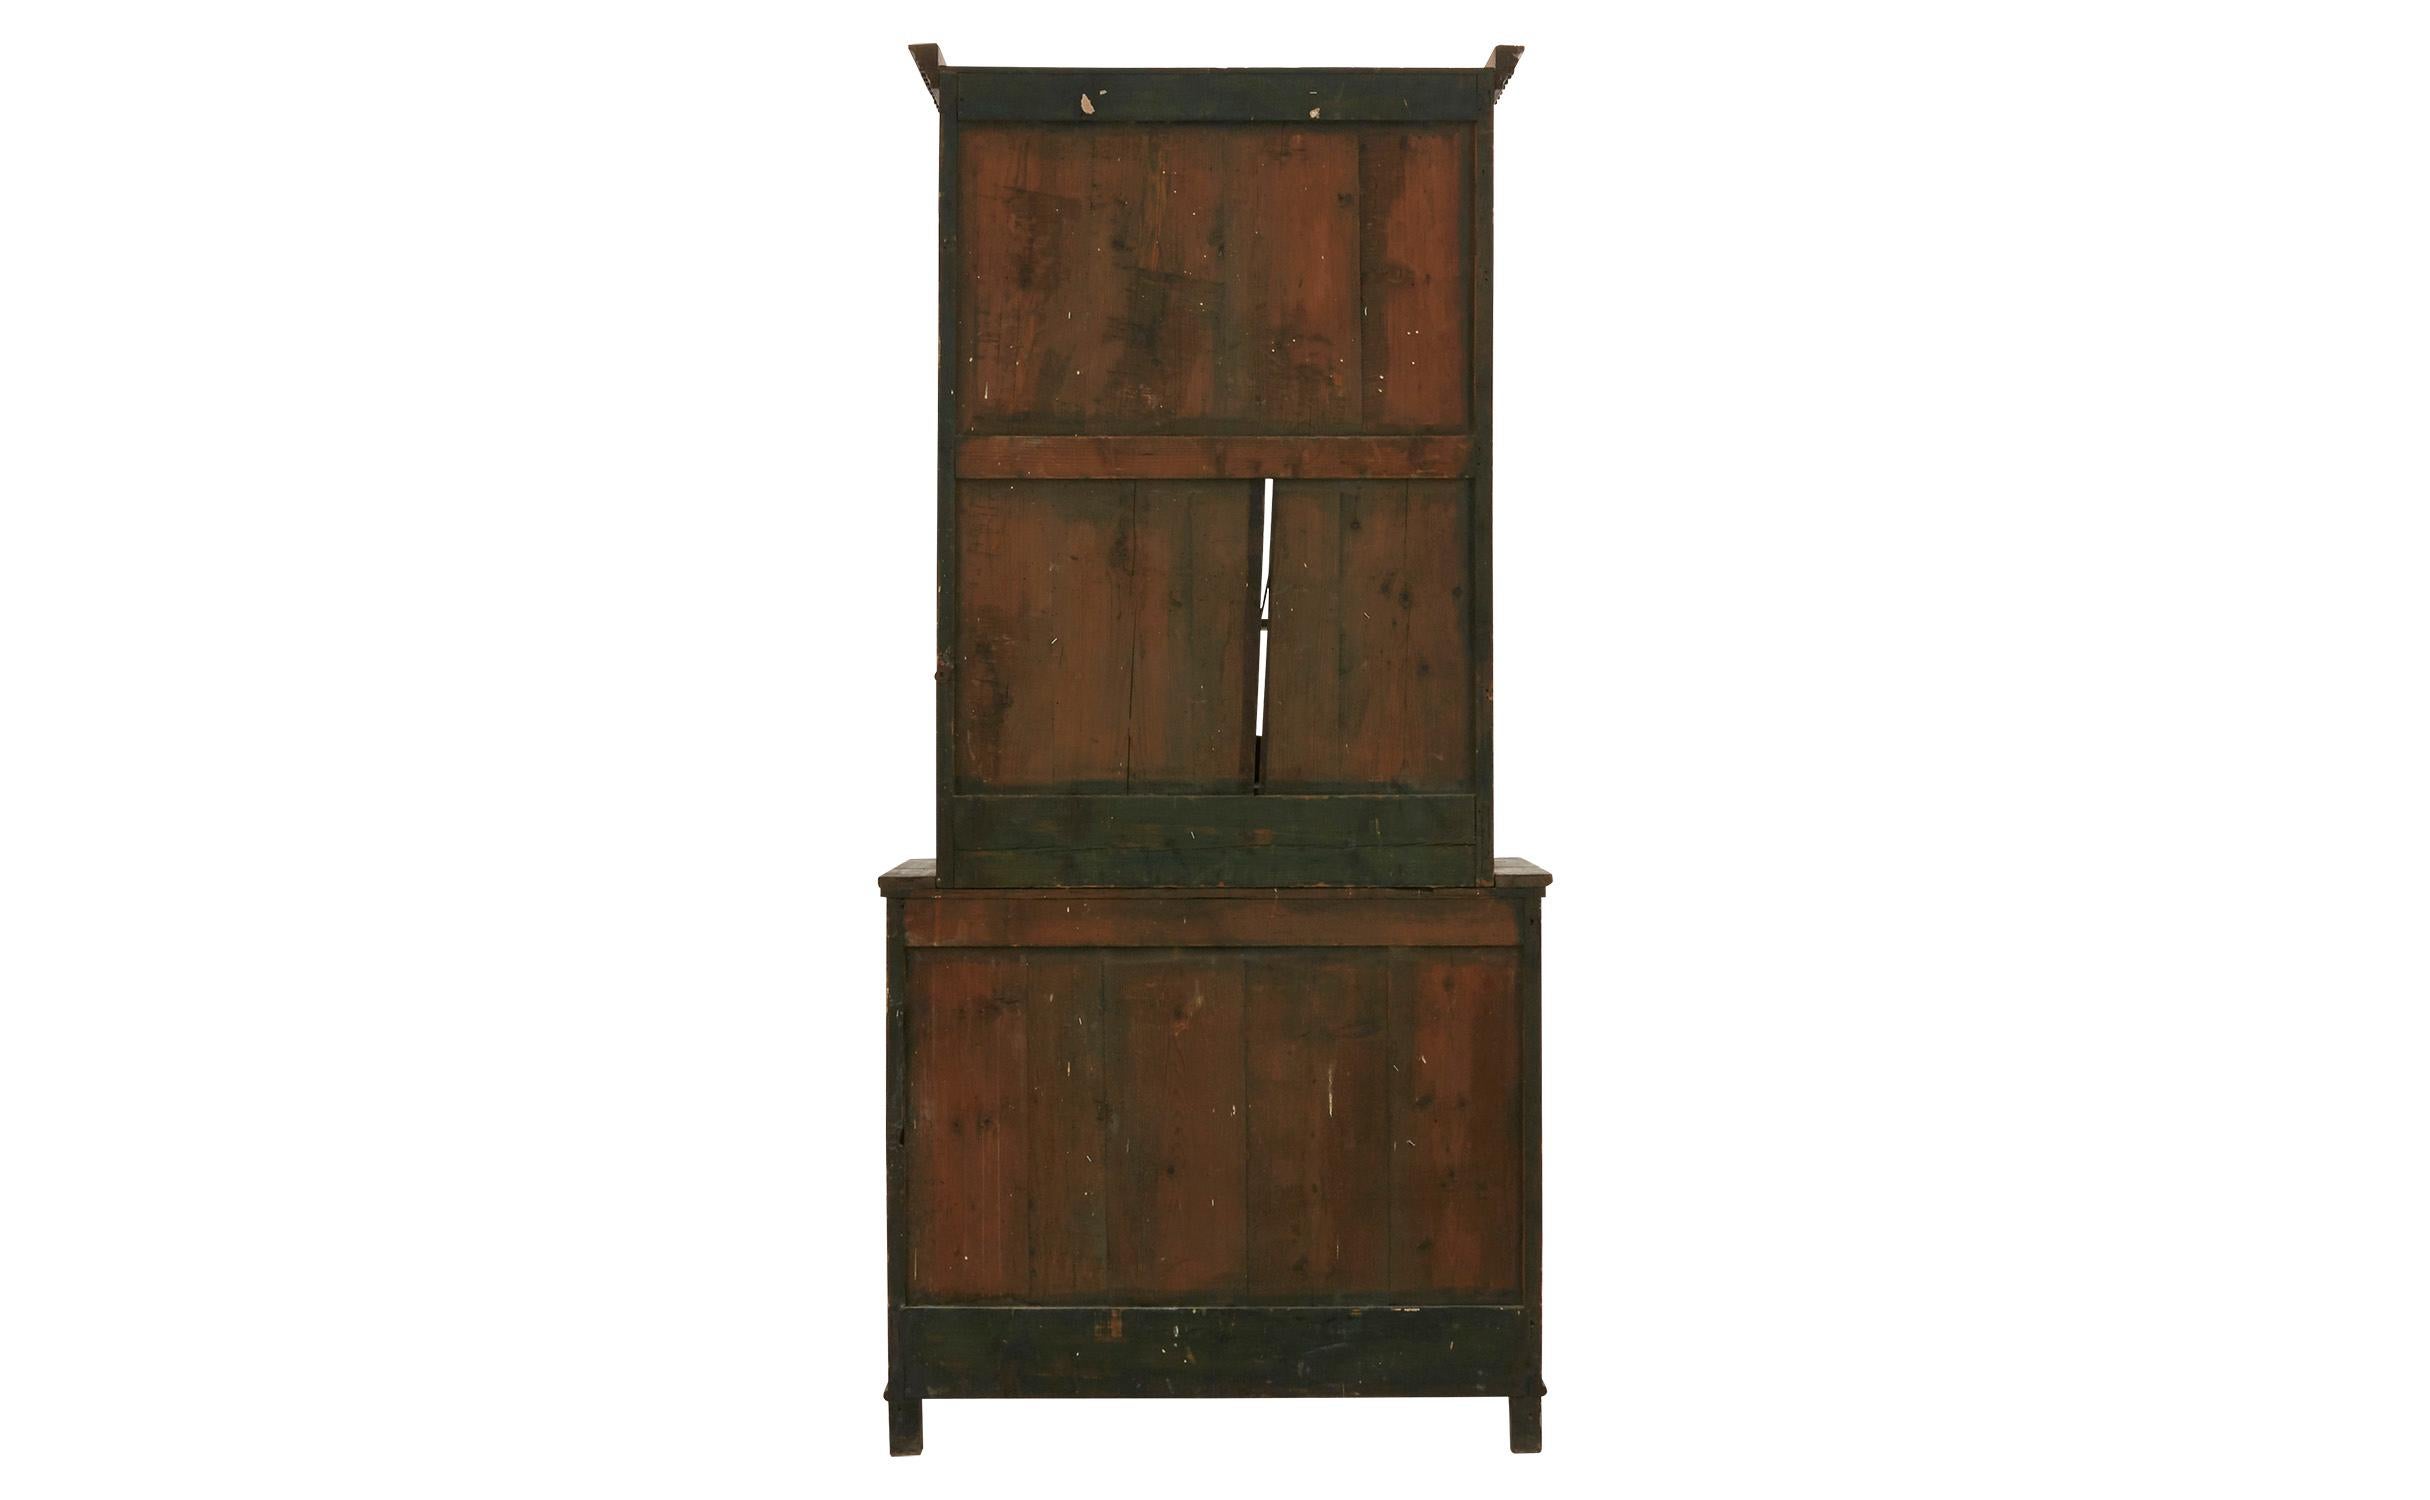 Painted Early 20th Century Wooden Breakfront Cabinet